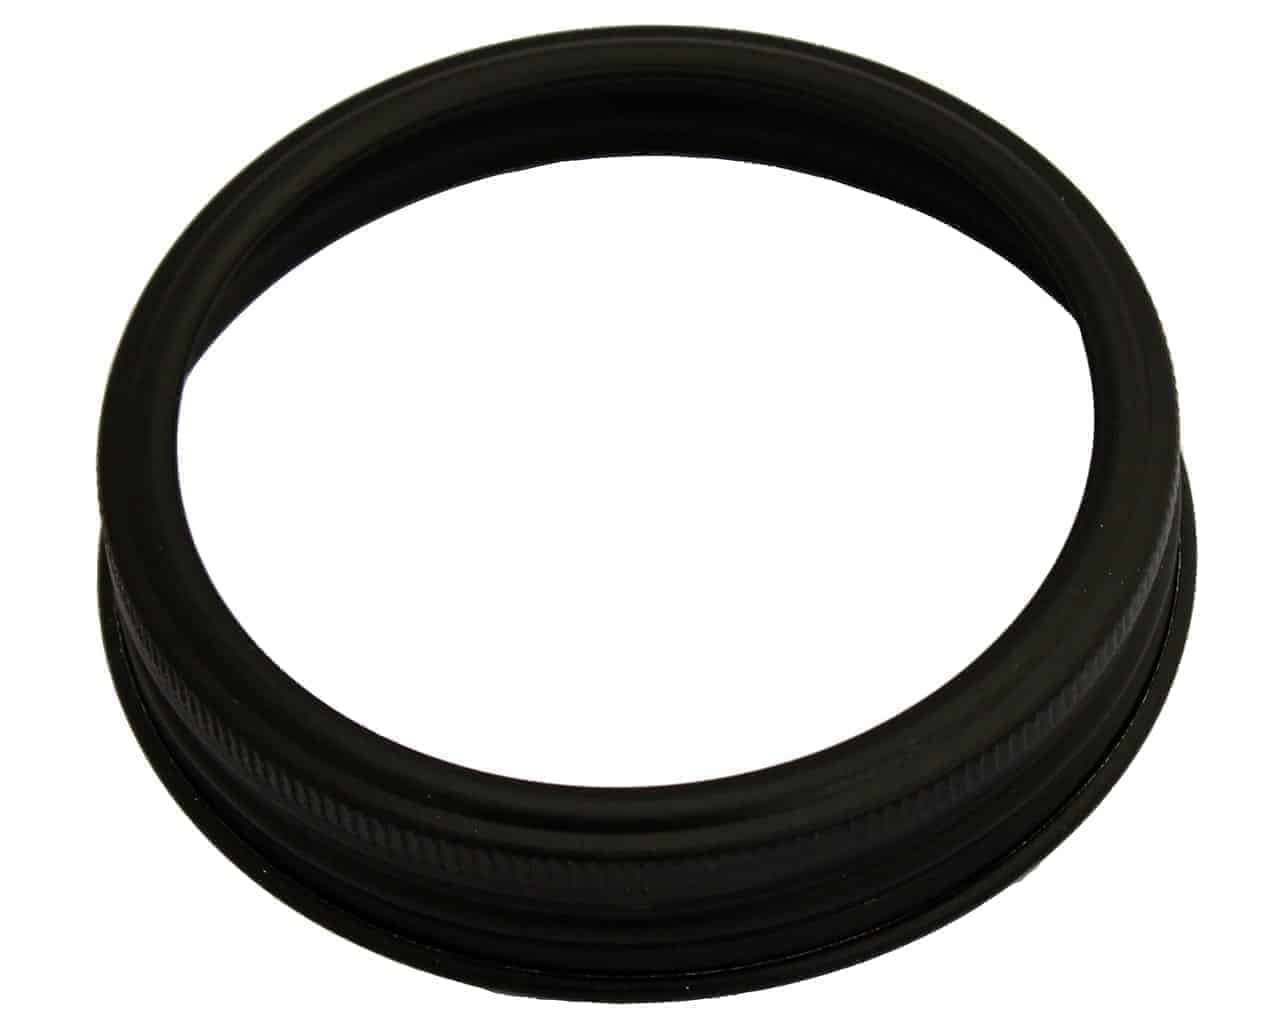 Matte black aluminum rust proof band / ring for wide mouth Mason jars